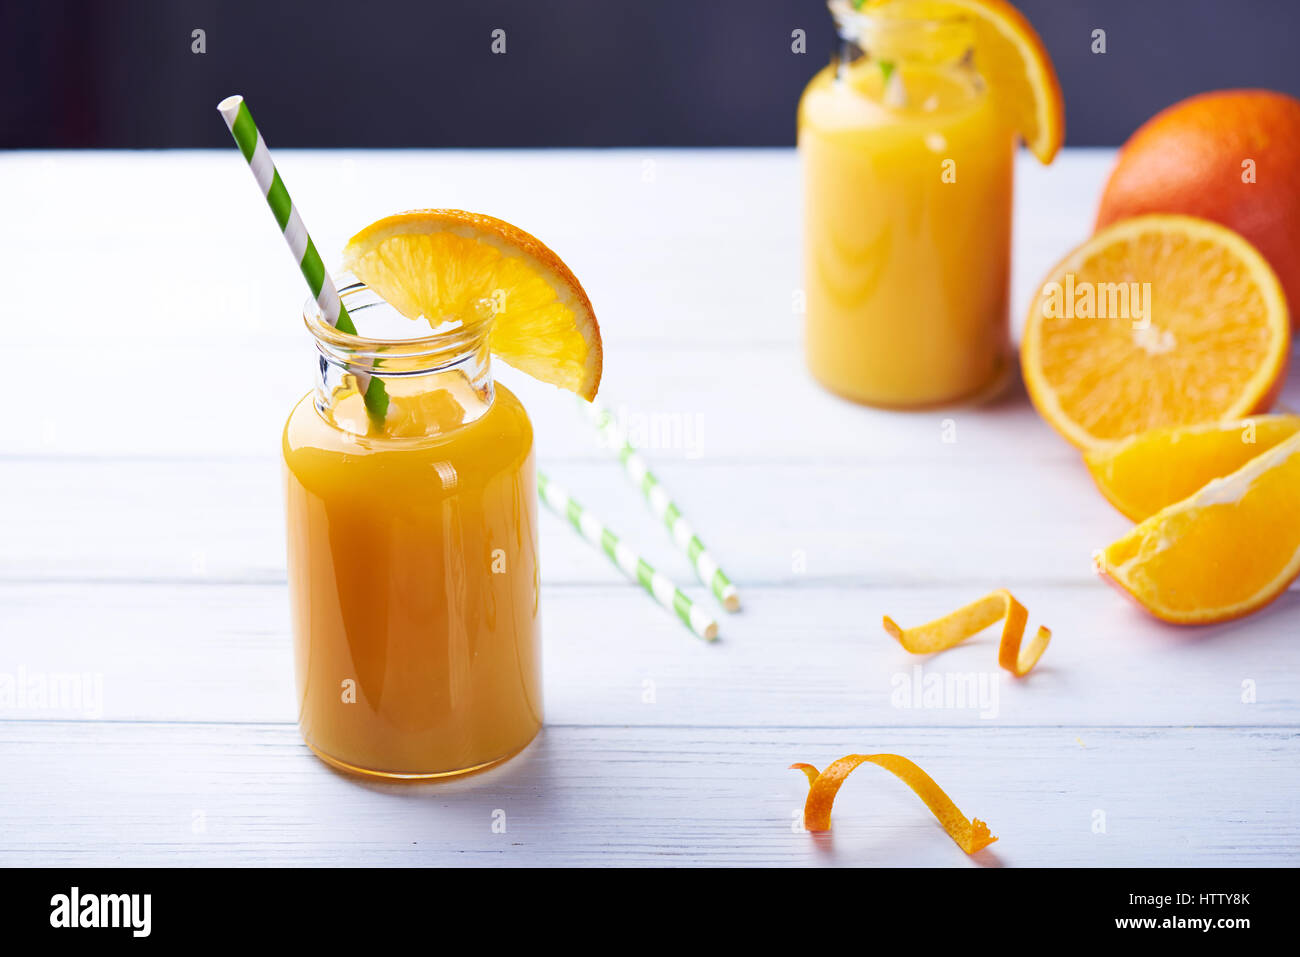 Juice In Glass Jar And Orange On Kitchen Table. Stock Photo, Picture and  Royalty Free Image. Image 14167034.